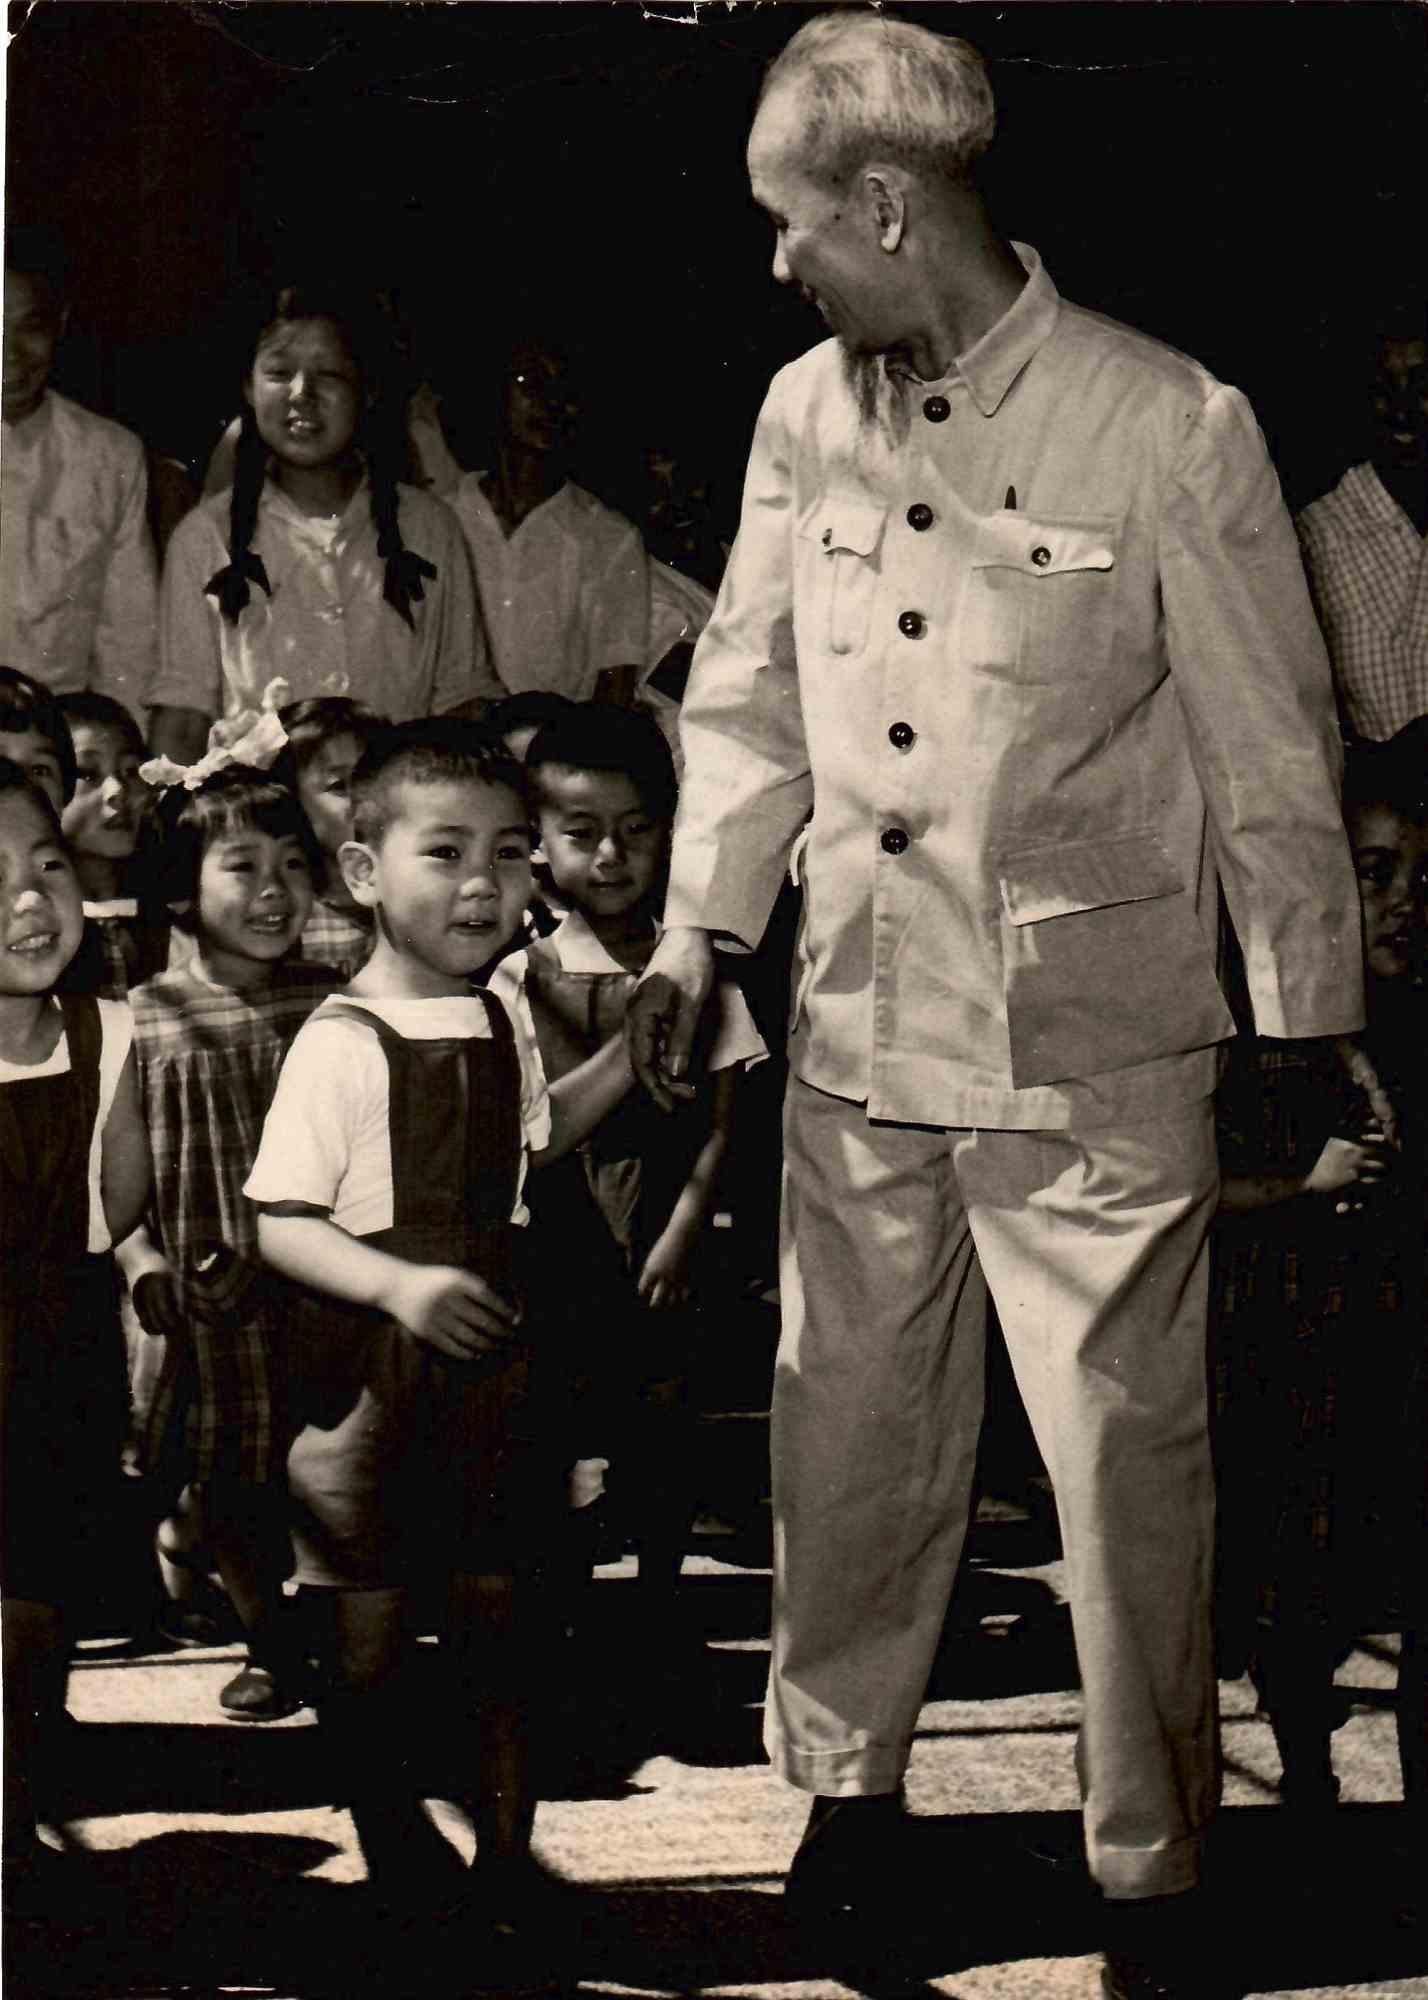  Ho Chi Minh with Children - Vintage B/W photo - 1960s